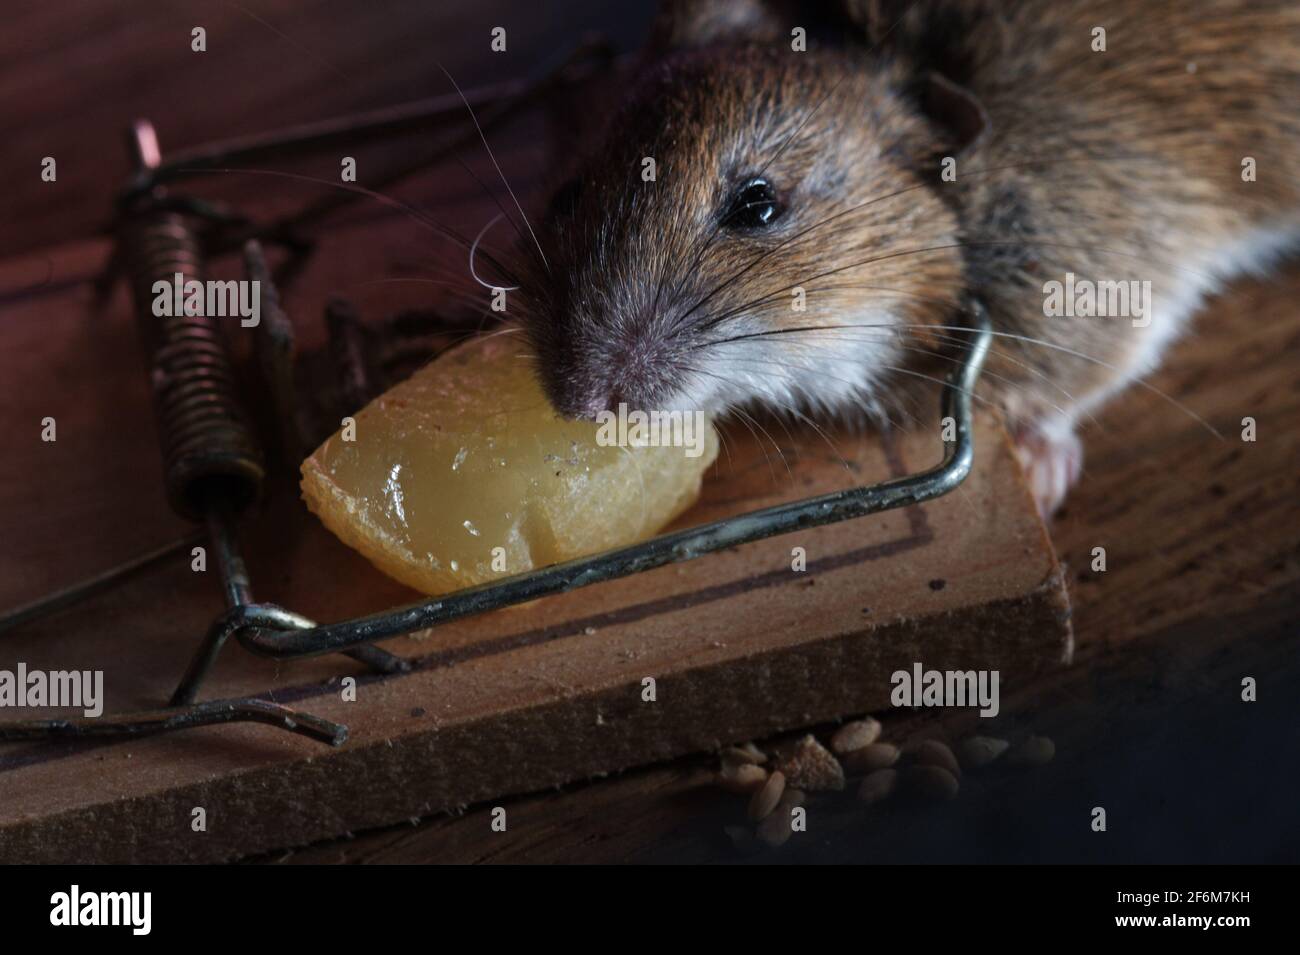 Maus in der Mausefalle gefangen | mouse caught in a mouse trap Stock Photo